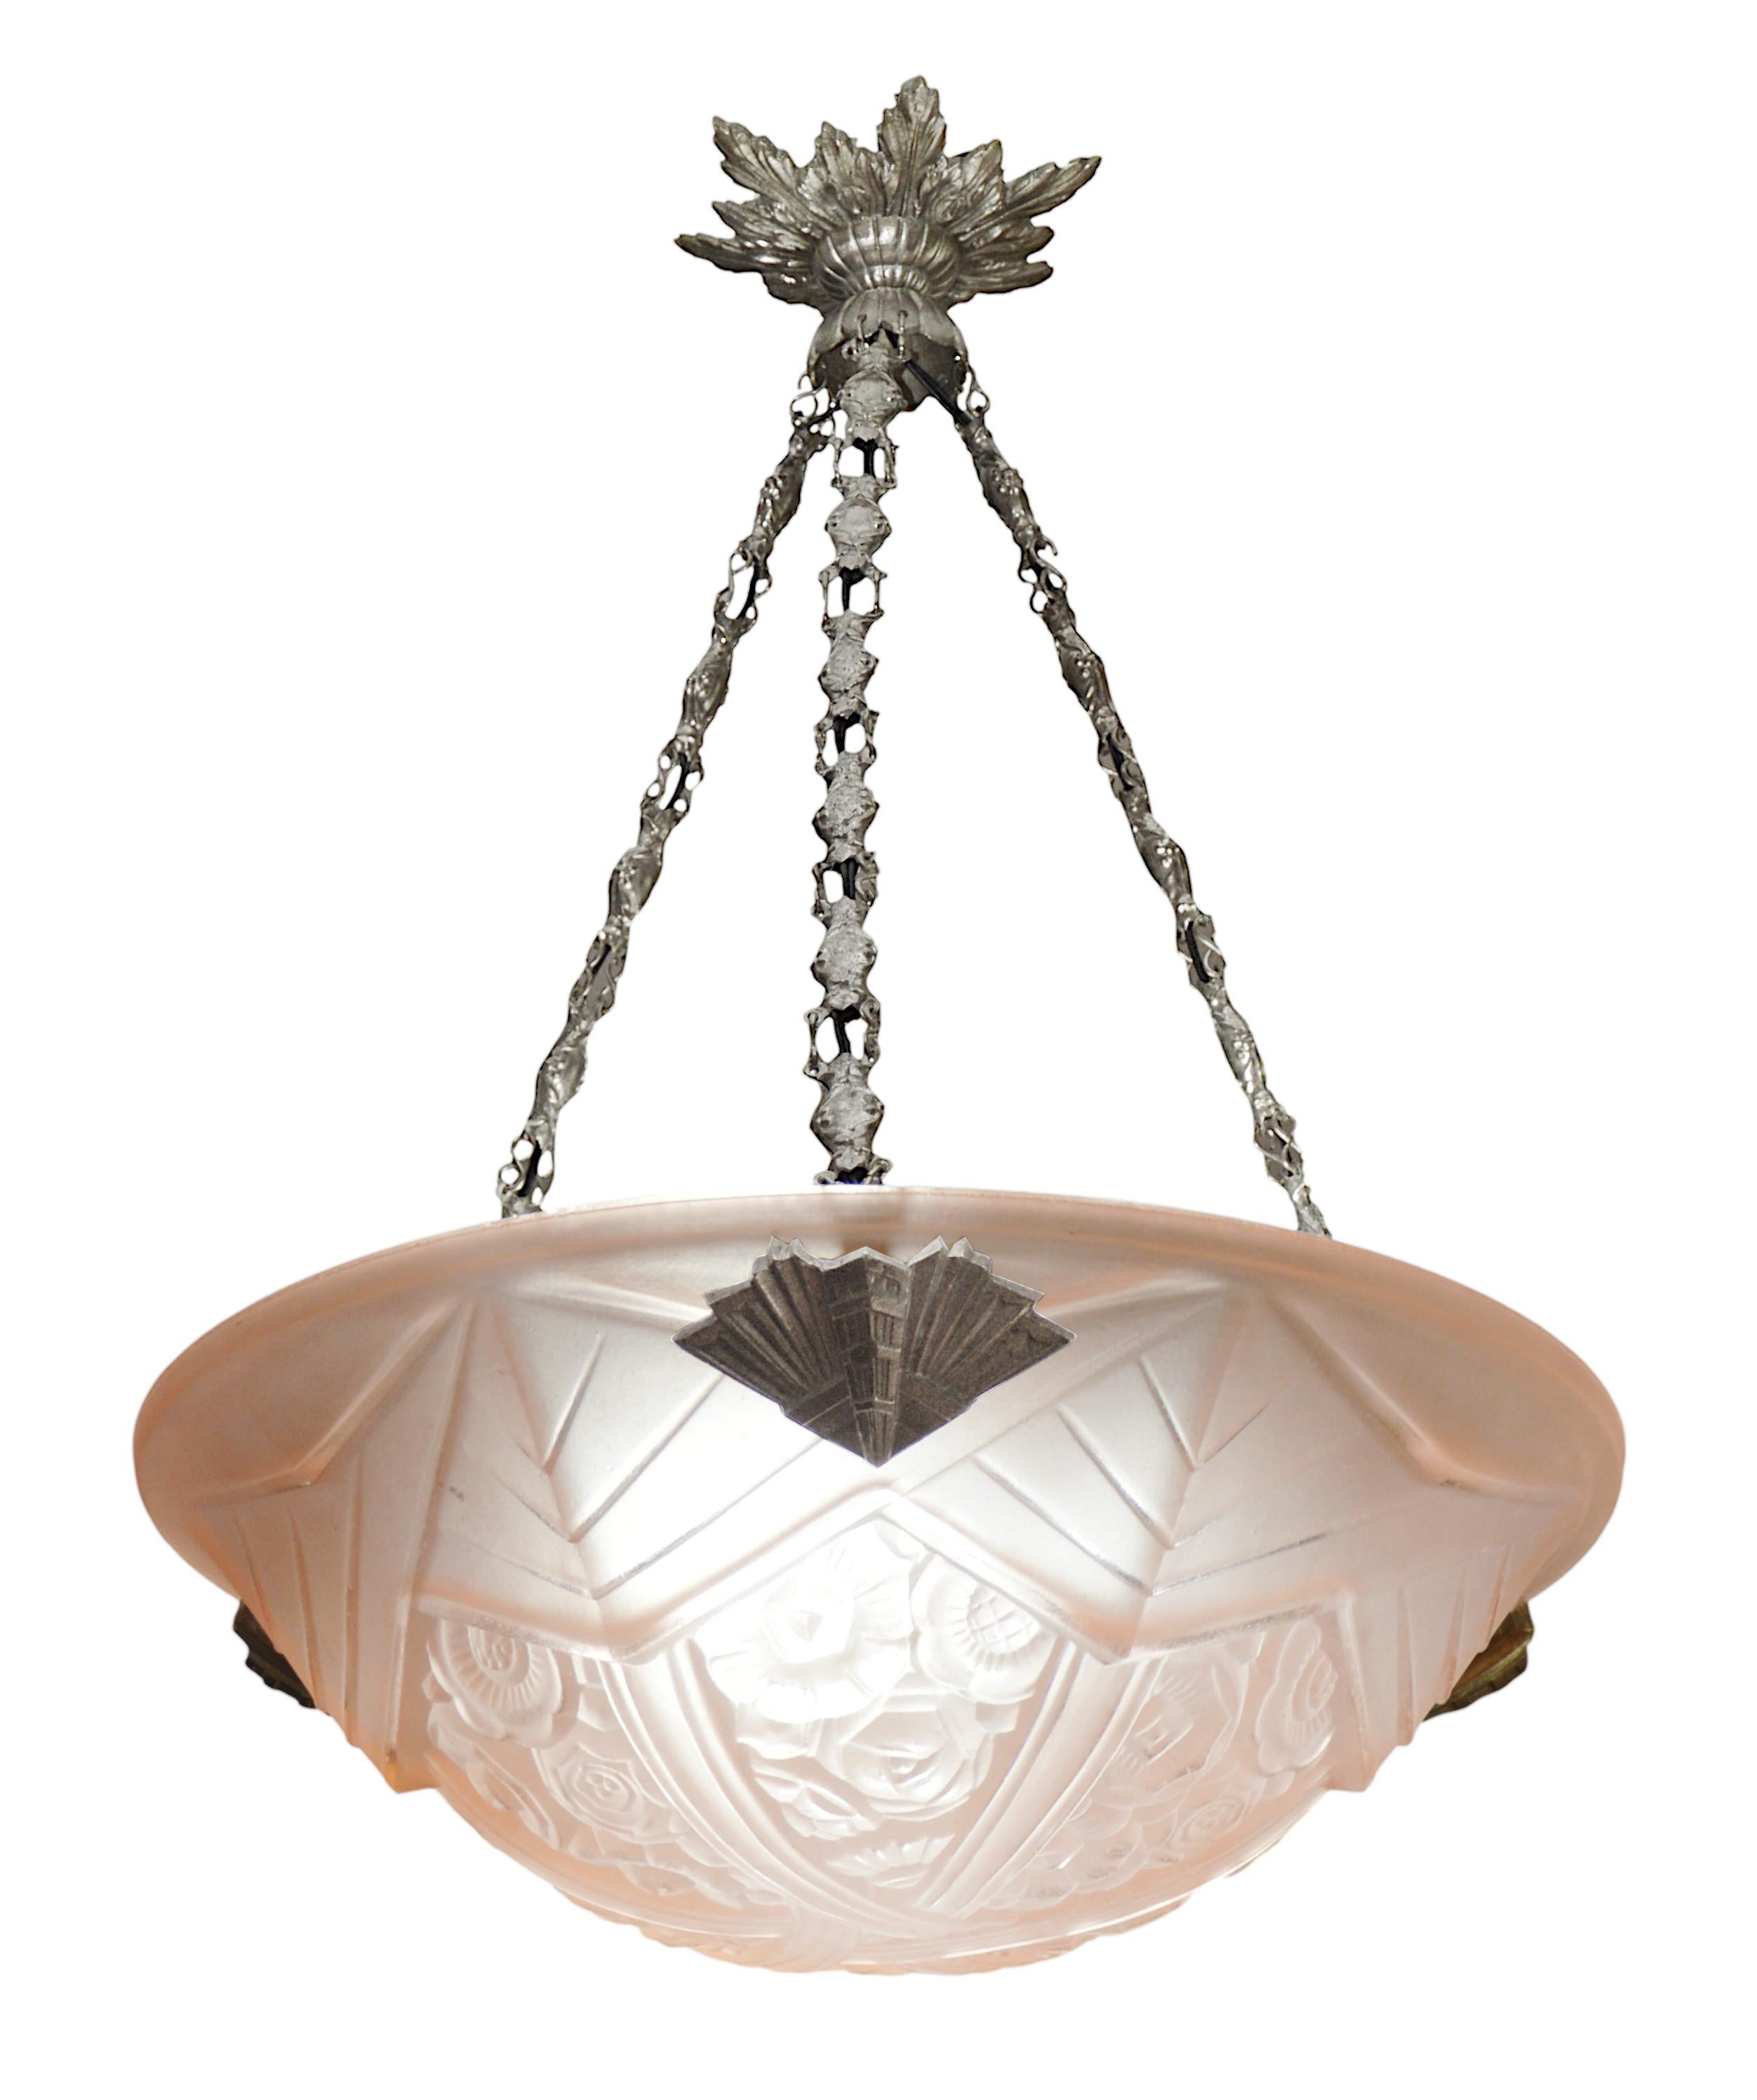 French Art Deco pendant chandelier by Jean Gauthier (Paris), France, 1920s. Pink frosted glass shade with a stylized floral pattern hung at its brass and bronze fixture. Same period as Lalique, Sabino, Etling, Measures: height: 18